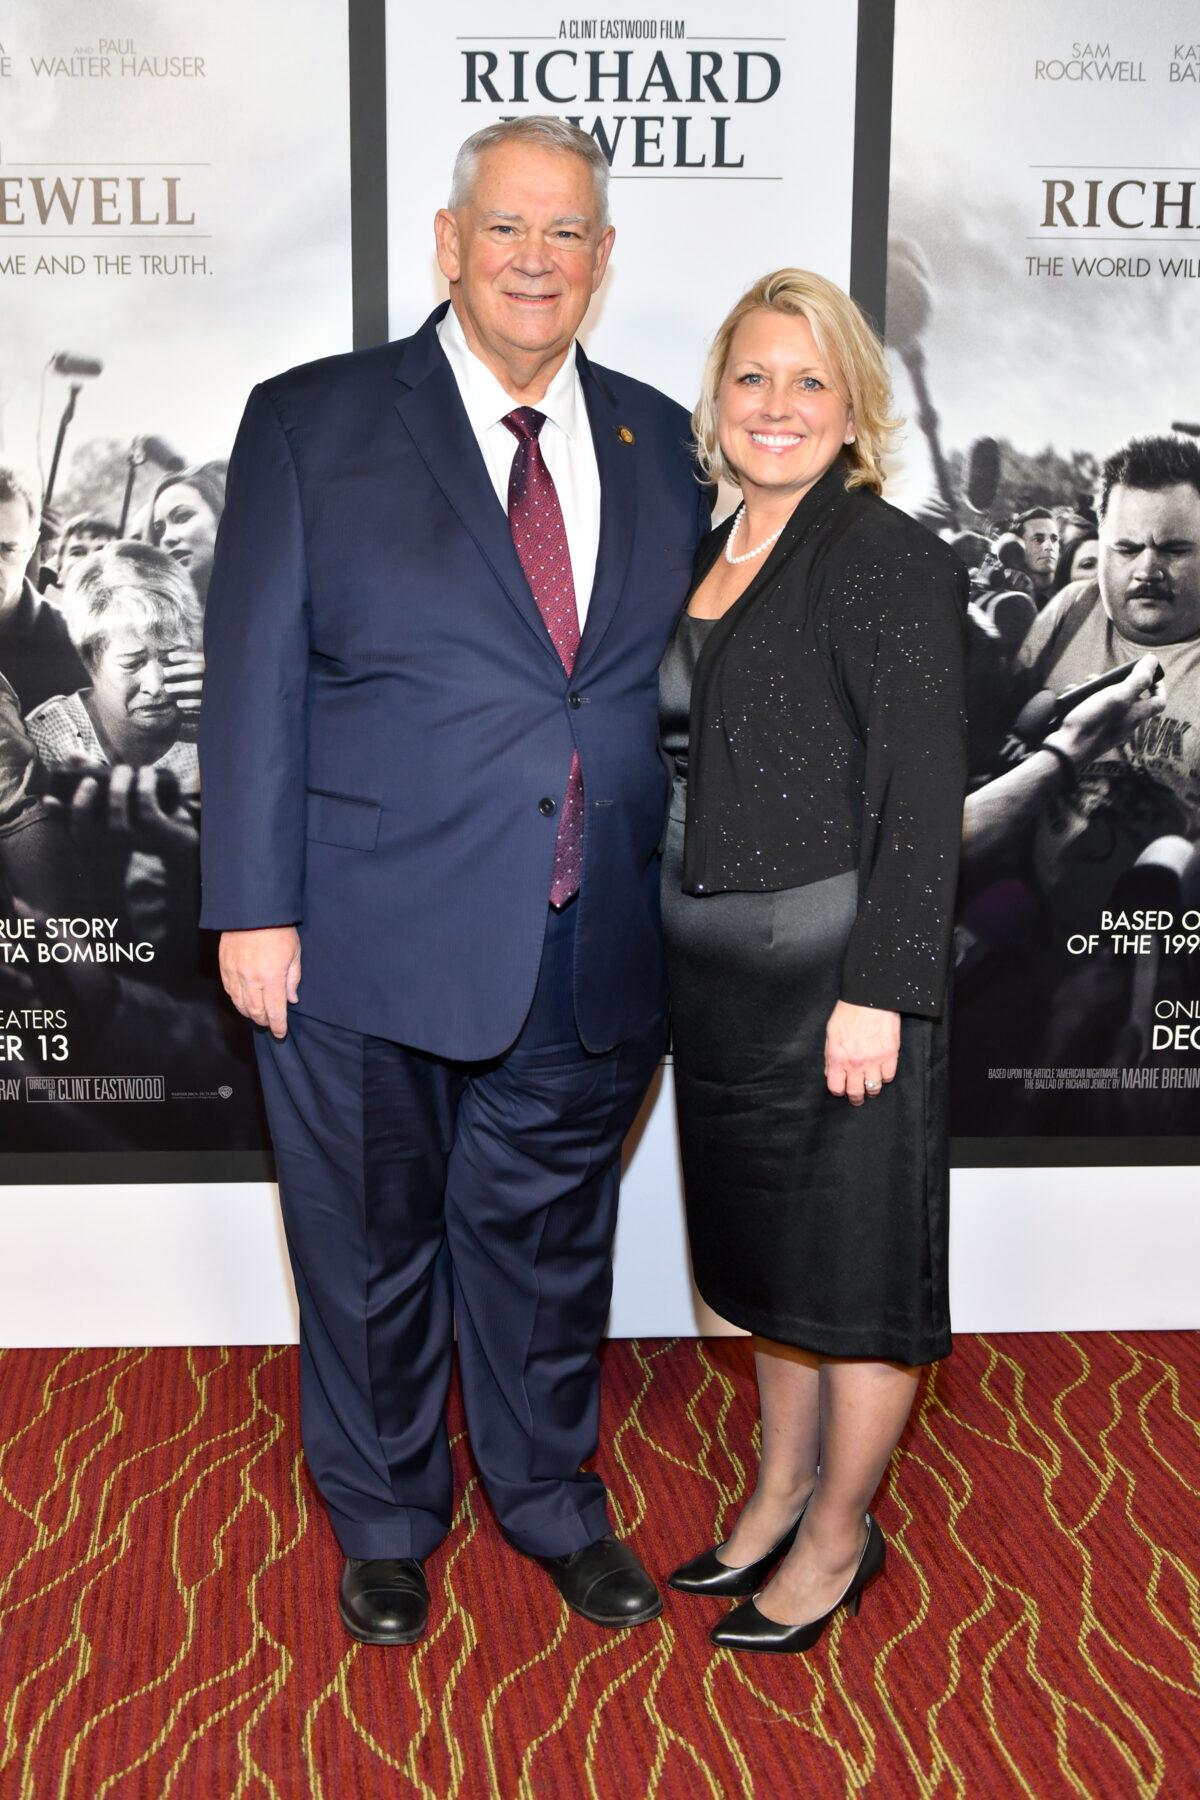 Georgia Rep. David Ralston and his wife attend a screening for "Richard Jewell" in Atlanta, Ga., on Dec. 10, 2019. (Derek White/Getty Images)